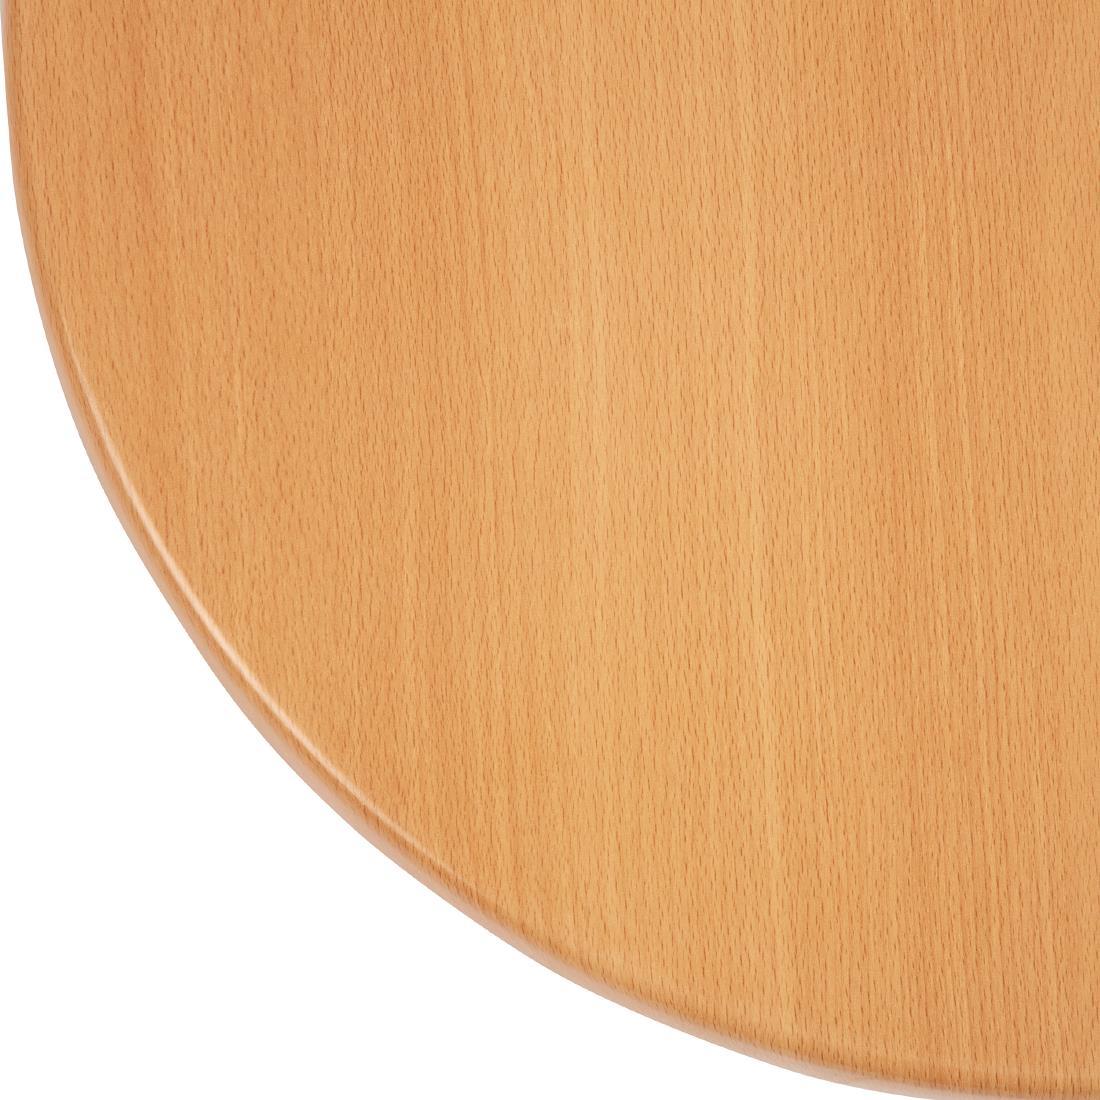 Bolero Pre-drilled Round Table Top Beech Effect 800mm - GL975  - 3